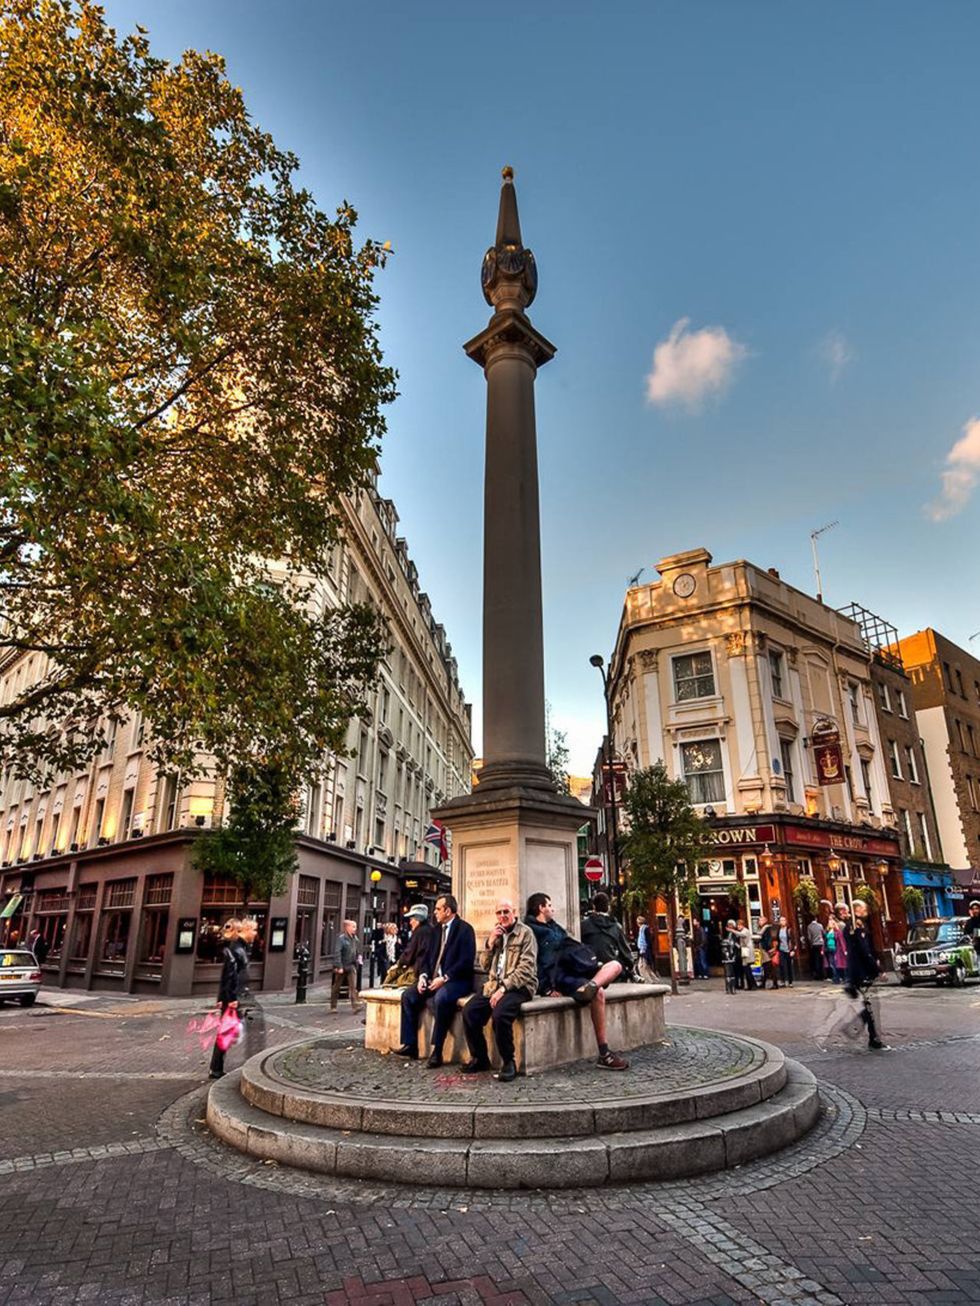 &lt;p&gt;&lt;strong&gt; &lt;/strong&gt;London shopping hot spots &lt;a href=&quot;https://www.facebook.com/sevendials&quot;&gt;Seven Dials&lt;/a&gt; and &lt;a href=&quot;http://www.elleuk.com/beauty/beauty-notes-daily/time-for-a-quick-blow-dry-manicure-at